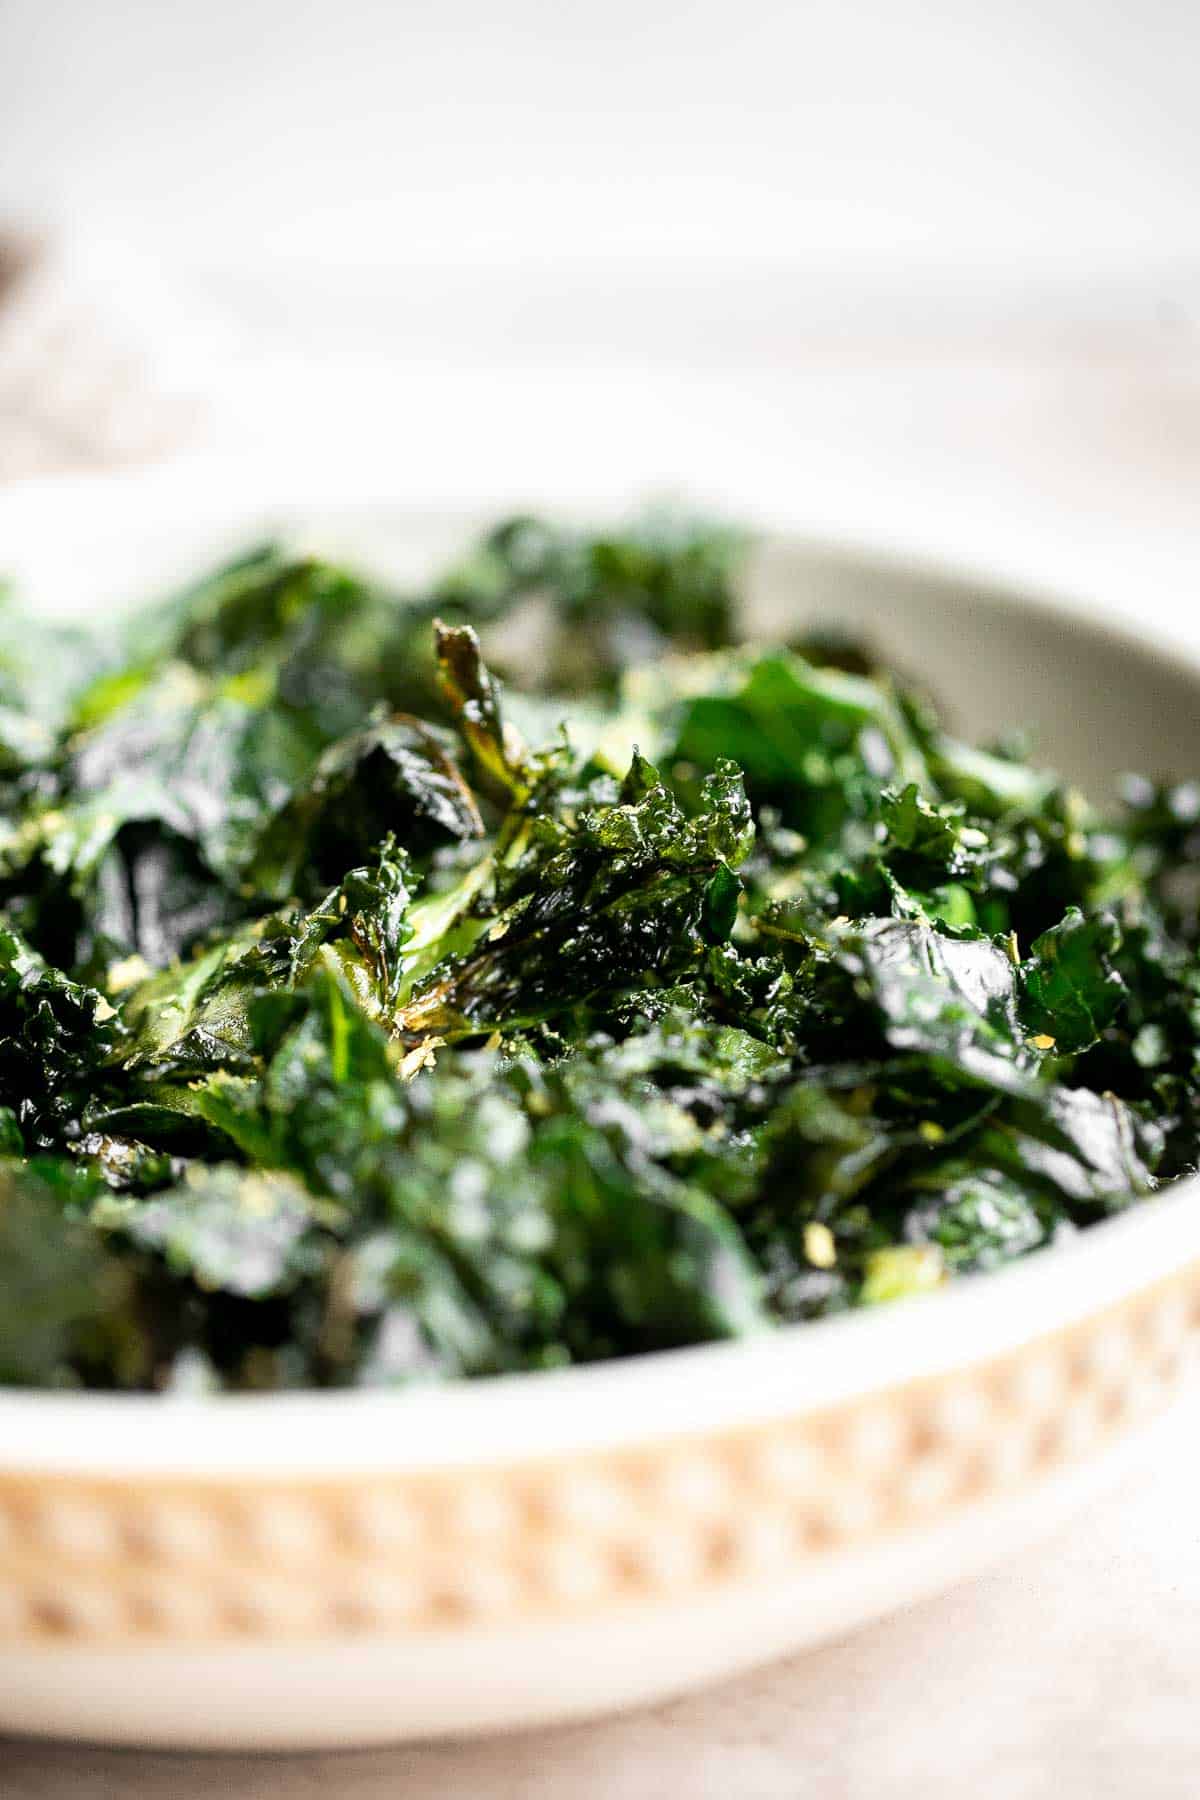 You’ll never want to buy chips after trying these incredibly light and crispy homemade Kale Chips! They’re completely vegan, easy to make, and healthy. | aheadofthyme.com